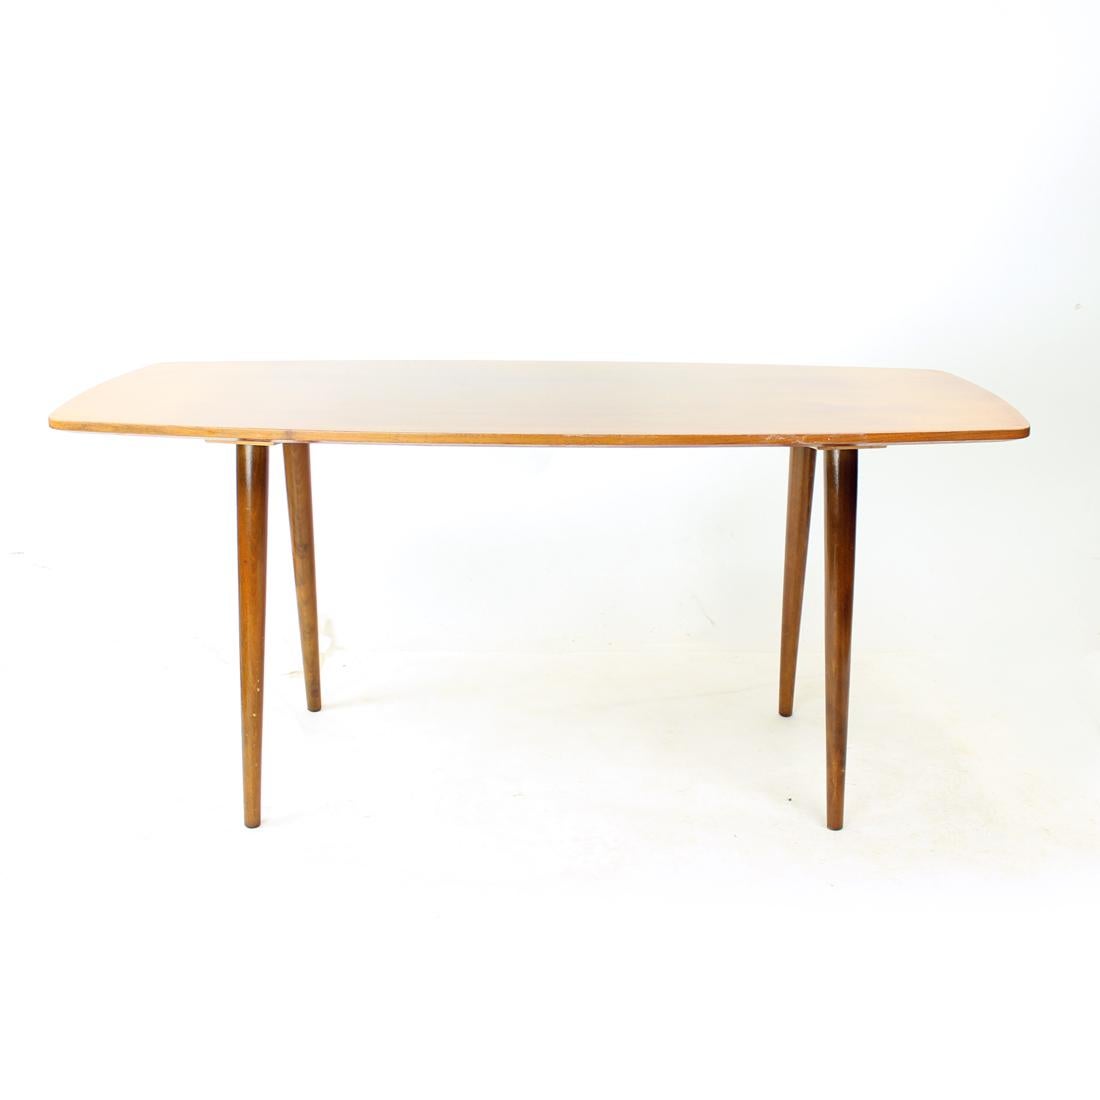 Beautiful vintage coffee table from the mid-century modern design era. Absolutely typical of the 60s designs. The table is made of oak board with oak legs. The top board in finished in an original high sheen lacquer with only few marks of use. Some